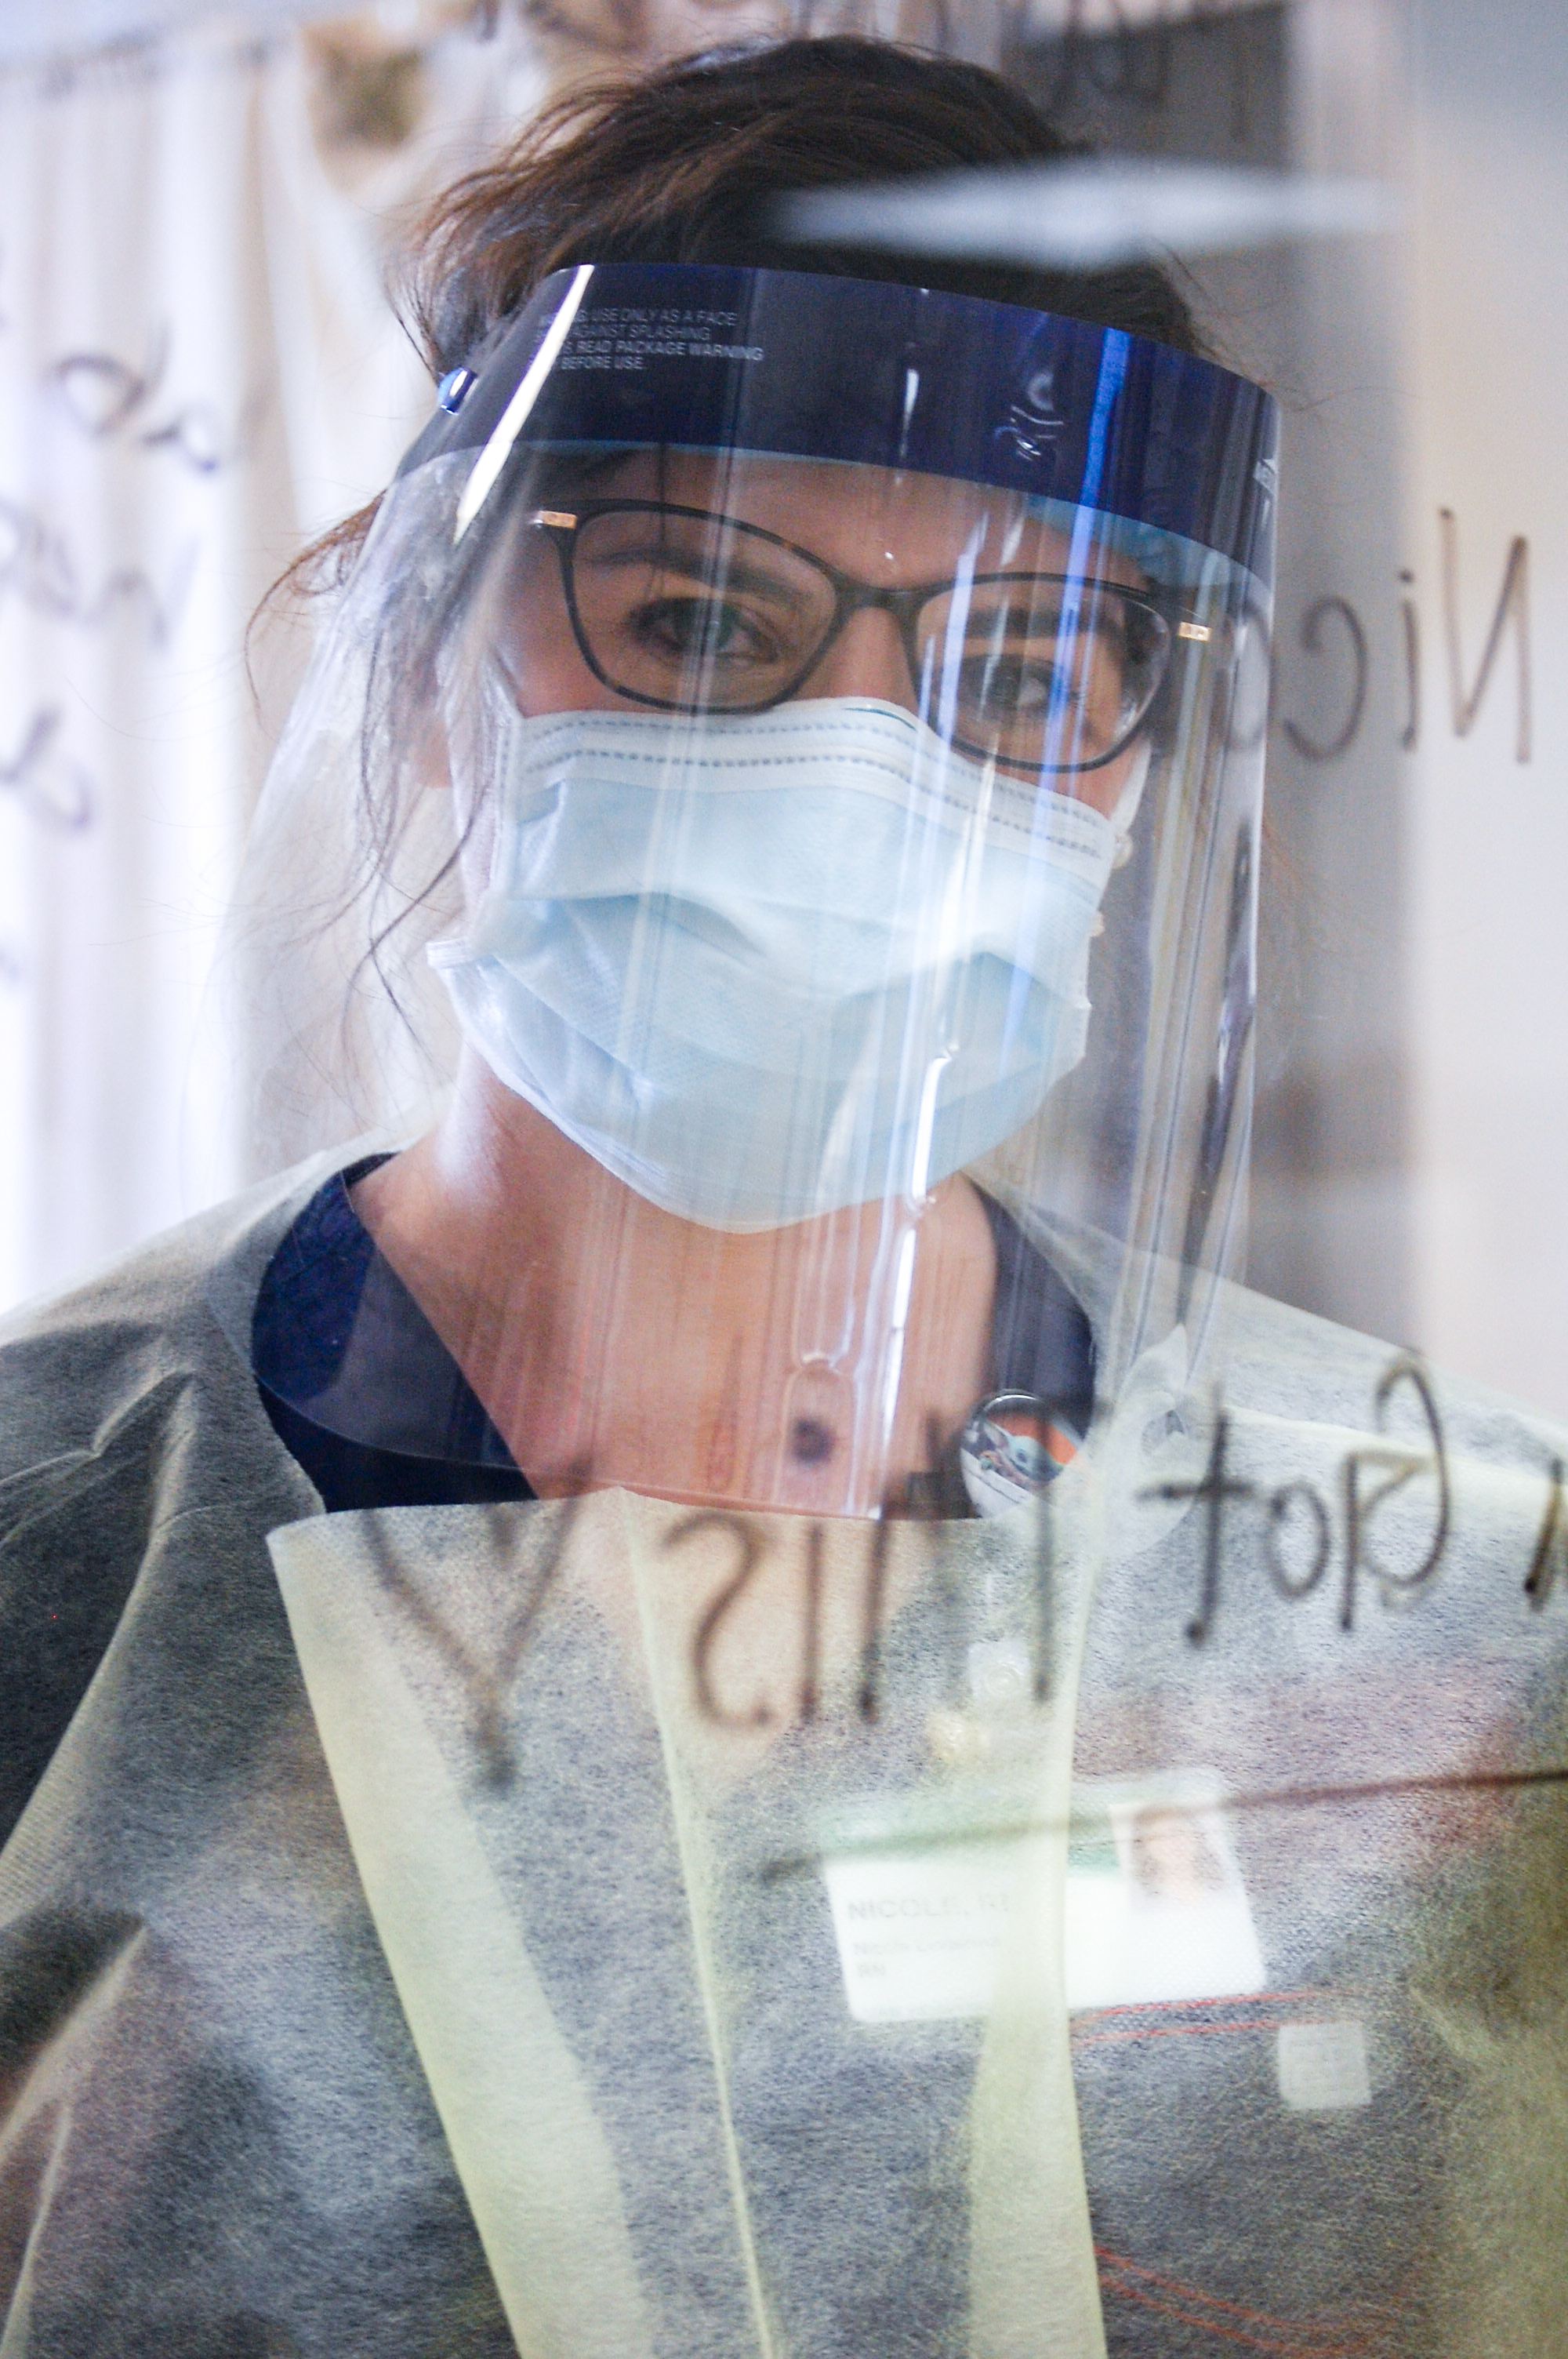 Female nurse is wearing Personal Protective Equipment (PPE) while working in the Hospital during the COVID-19 (Novel Coronavirus) pandemic, March 2020.